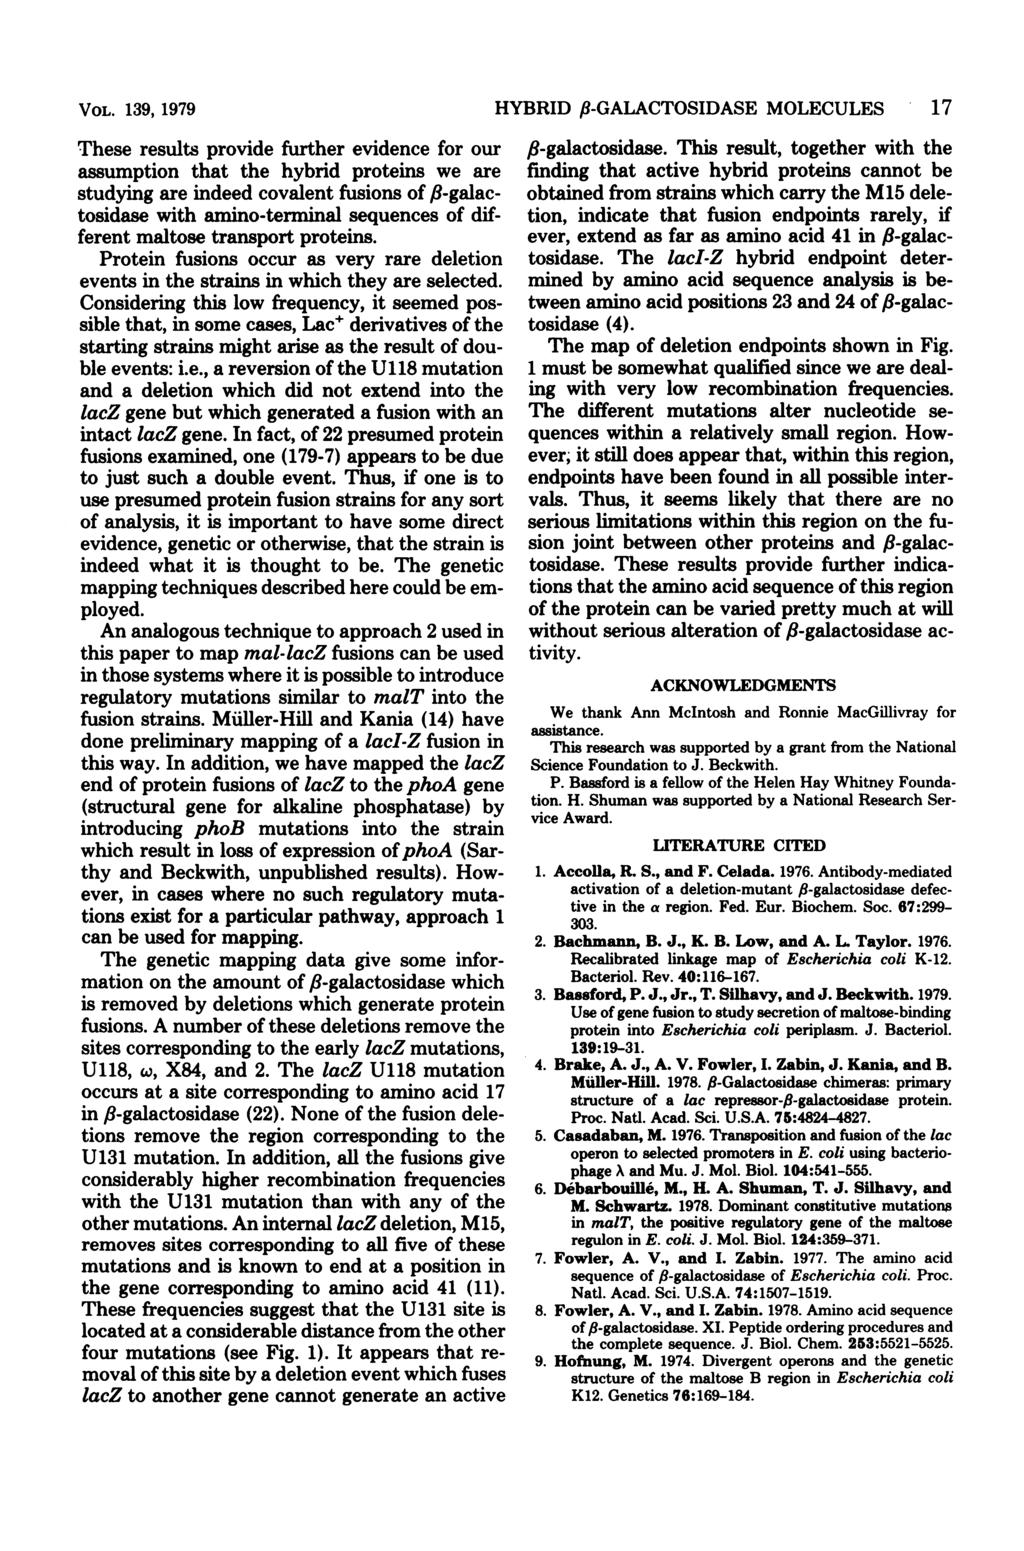 VOL. 139, 1979 These results provide further evidence for our assumption that the hybrid proteins we are studying are indeed covalent fusions of 8-galactosidase with amino-terminal sequences of